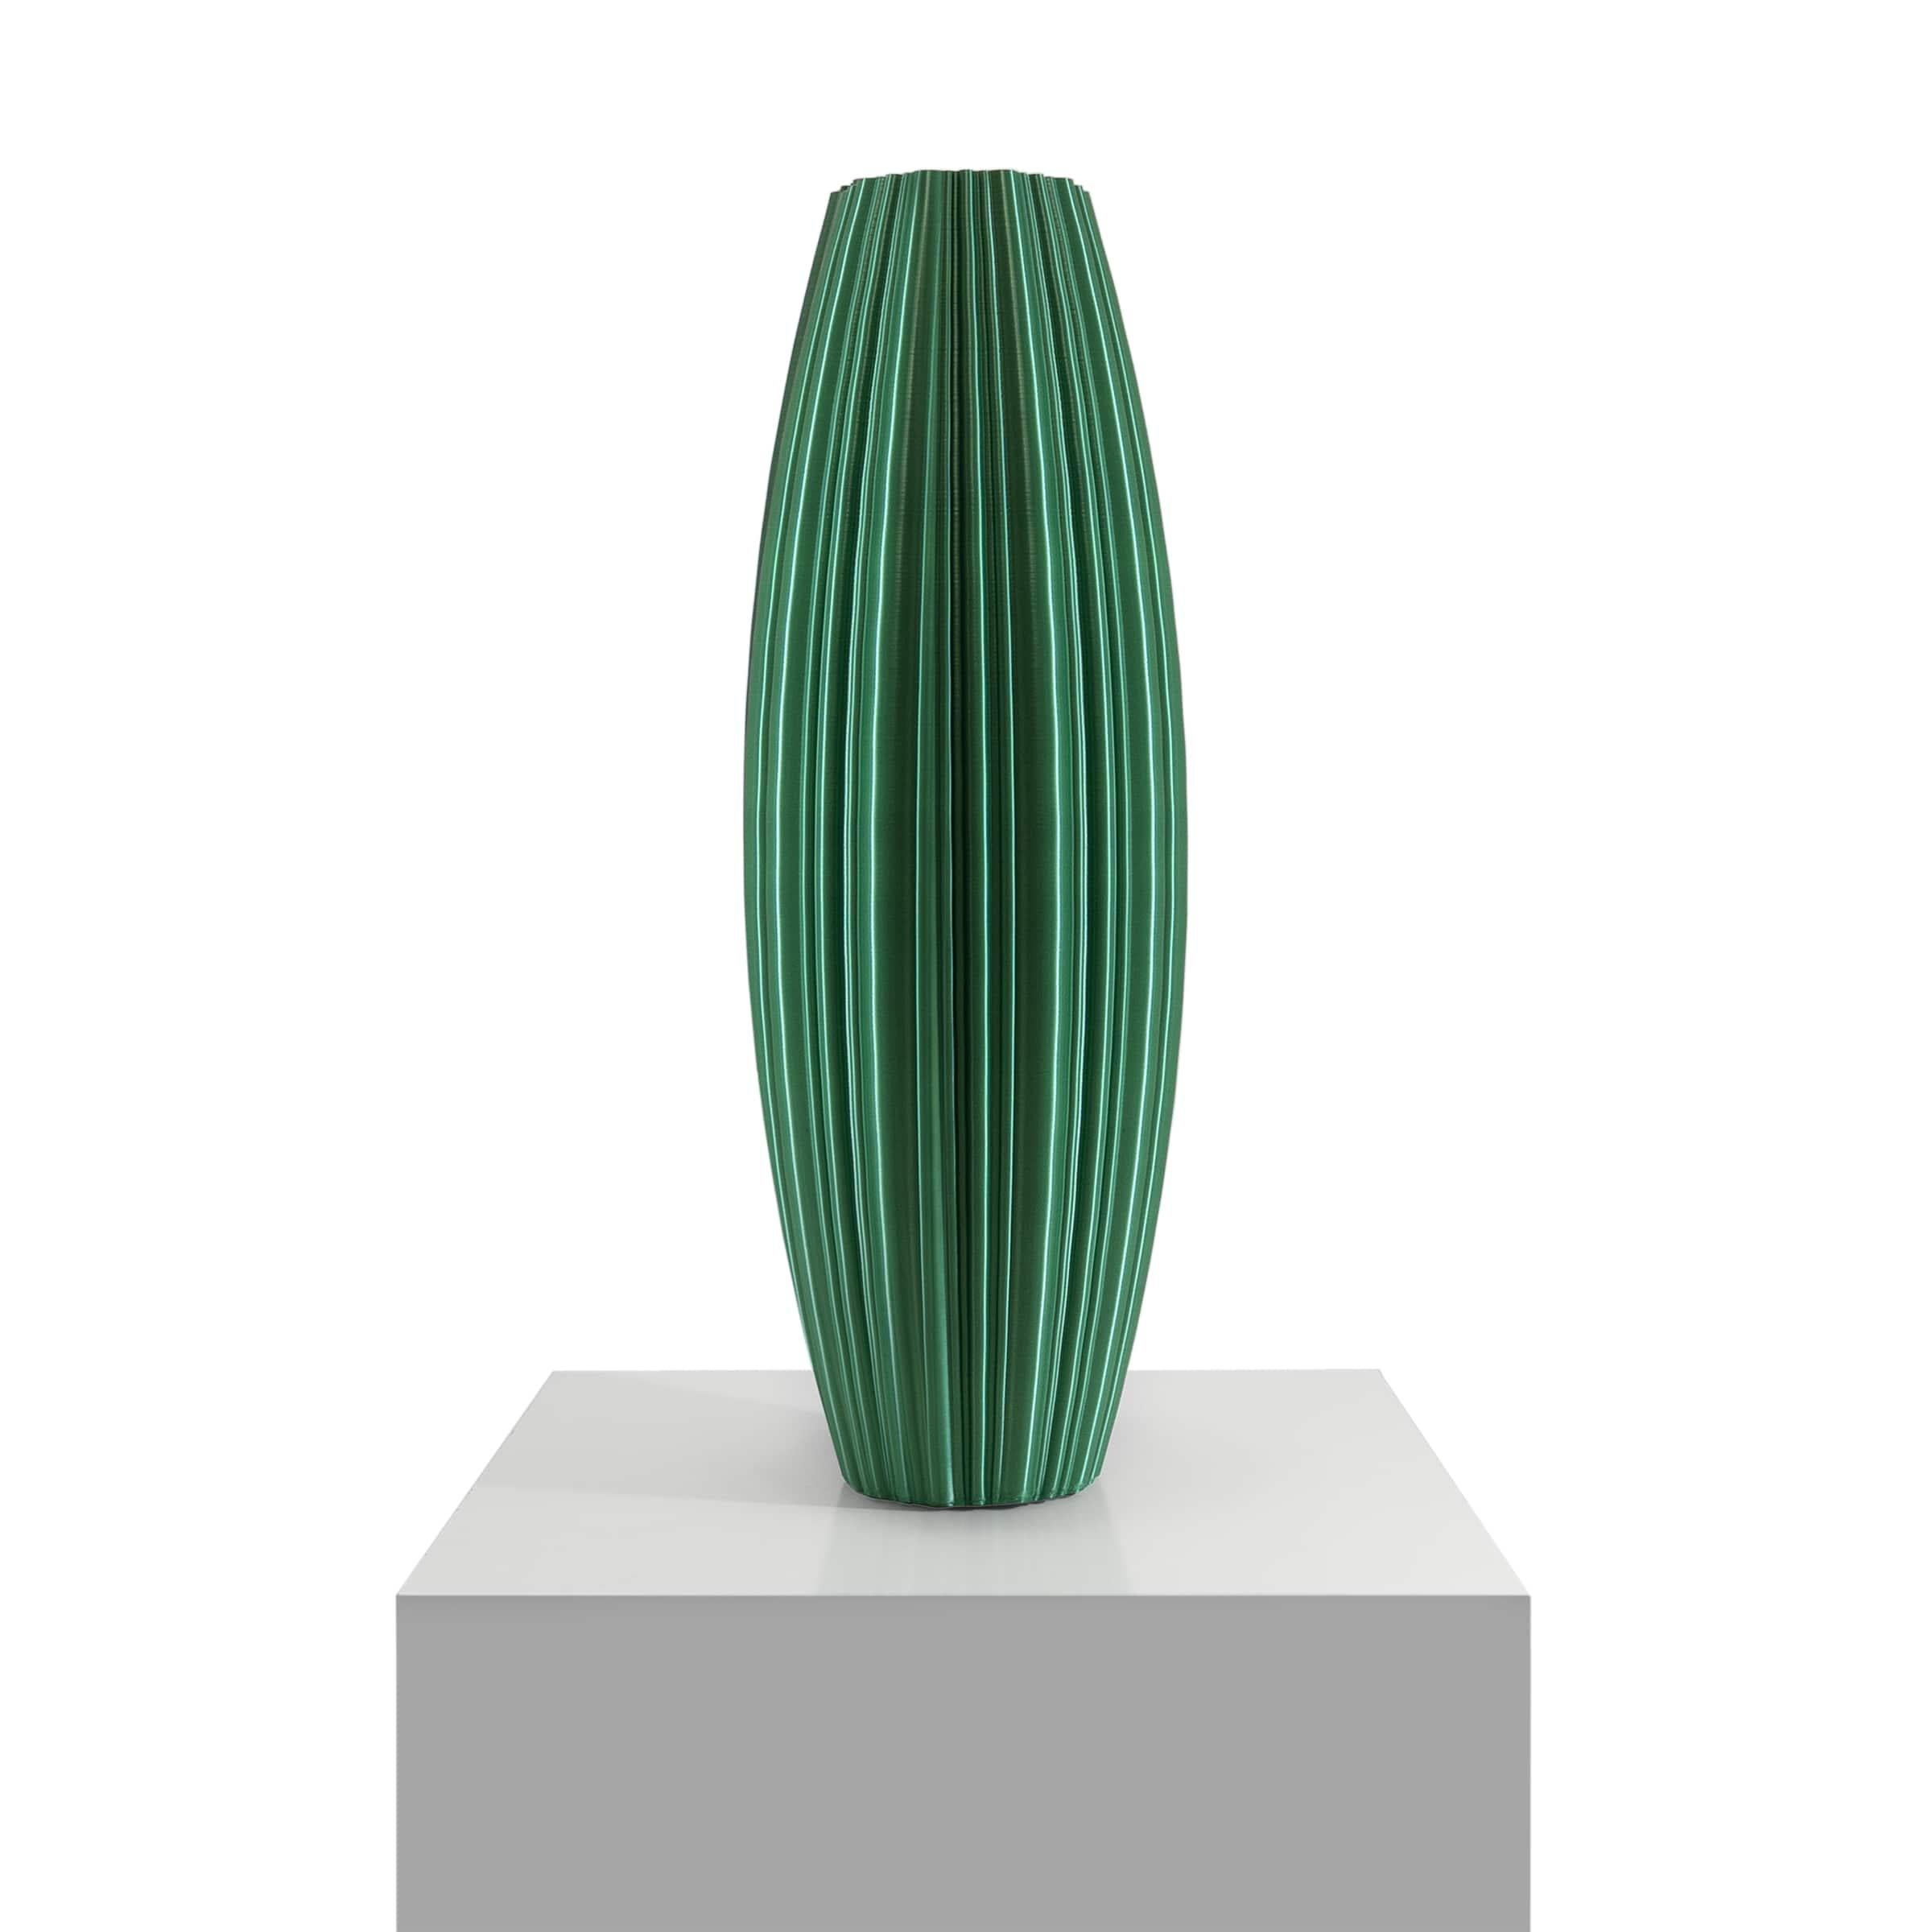 Vase-sculpture by DygoDesign
Part of the Dygo Selection Collection of sculptural designs, this gorgeous piece features soft and soothing lines, sturdy yet delicate at the same time. Fashioned of resin according to sustainable and innovative